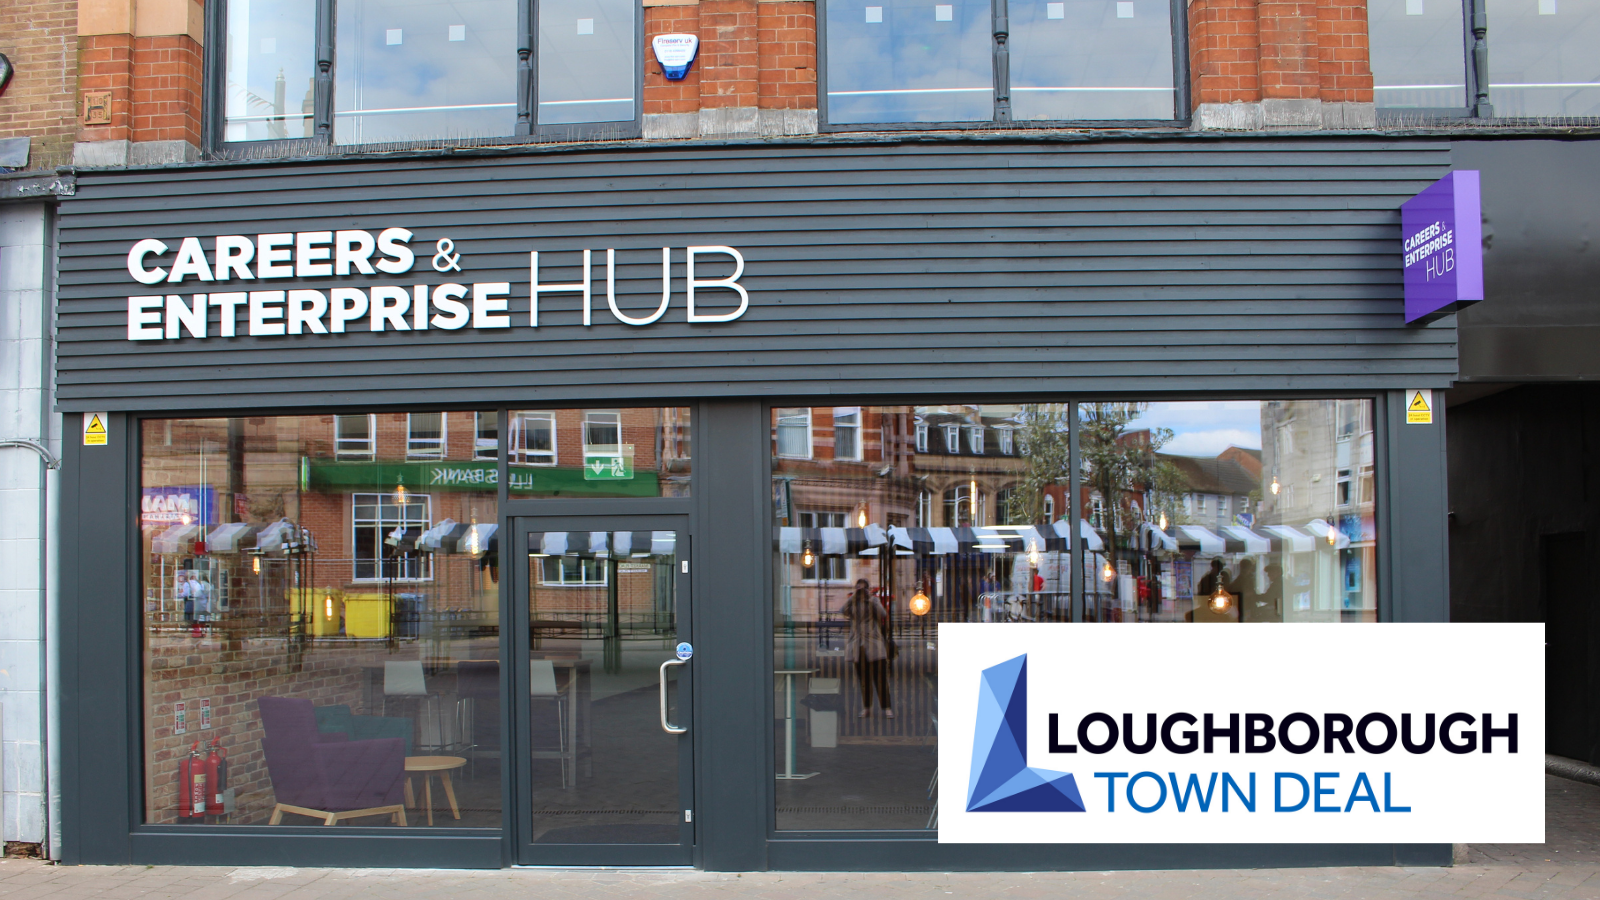 Projects worth over £40 million to boost jobs, skills and town centre secure Loughborough Town Deal support